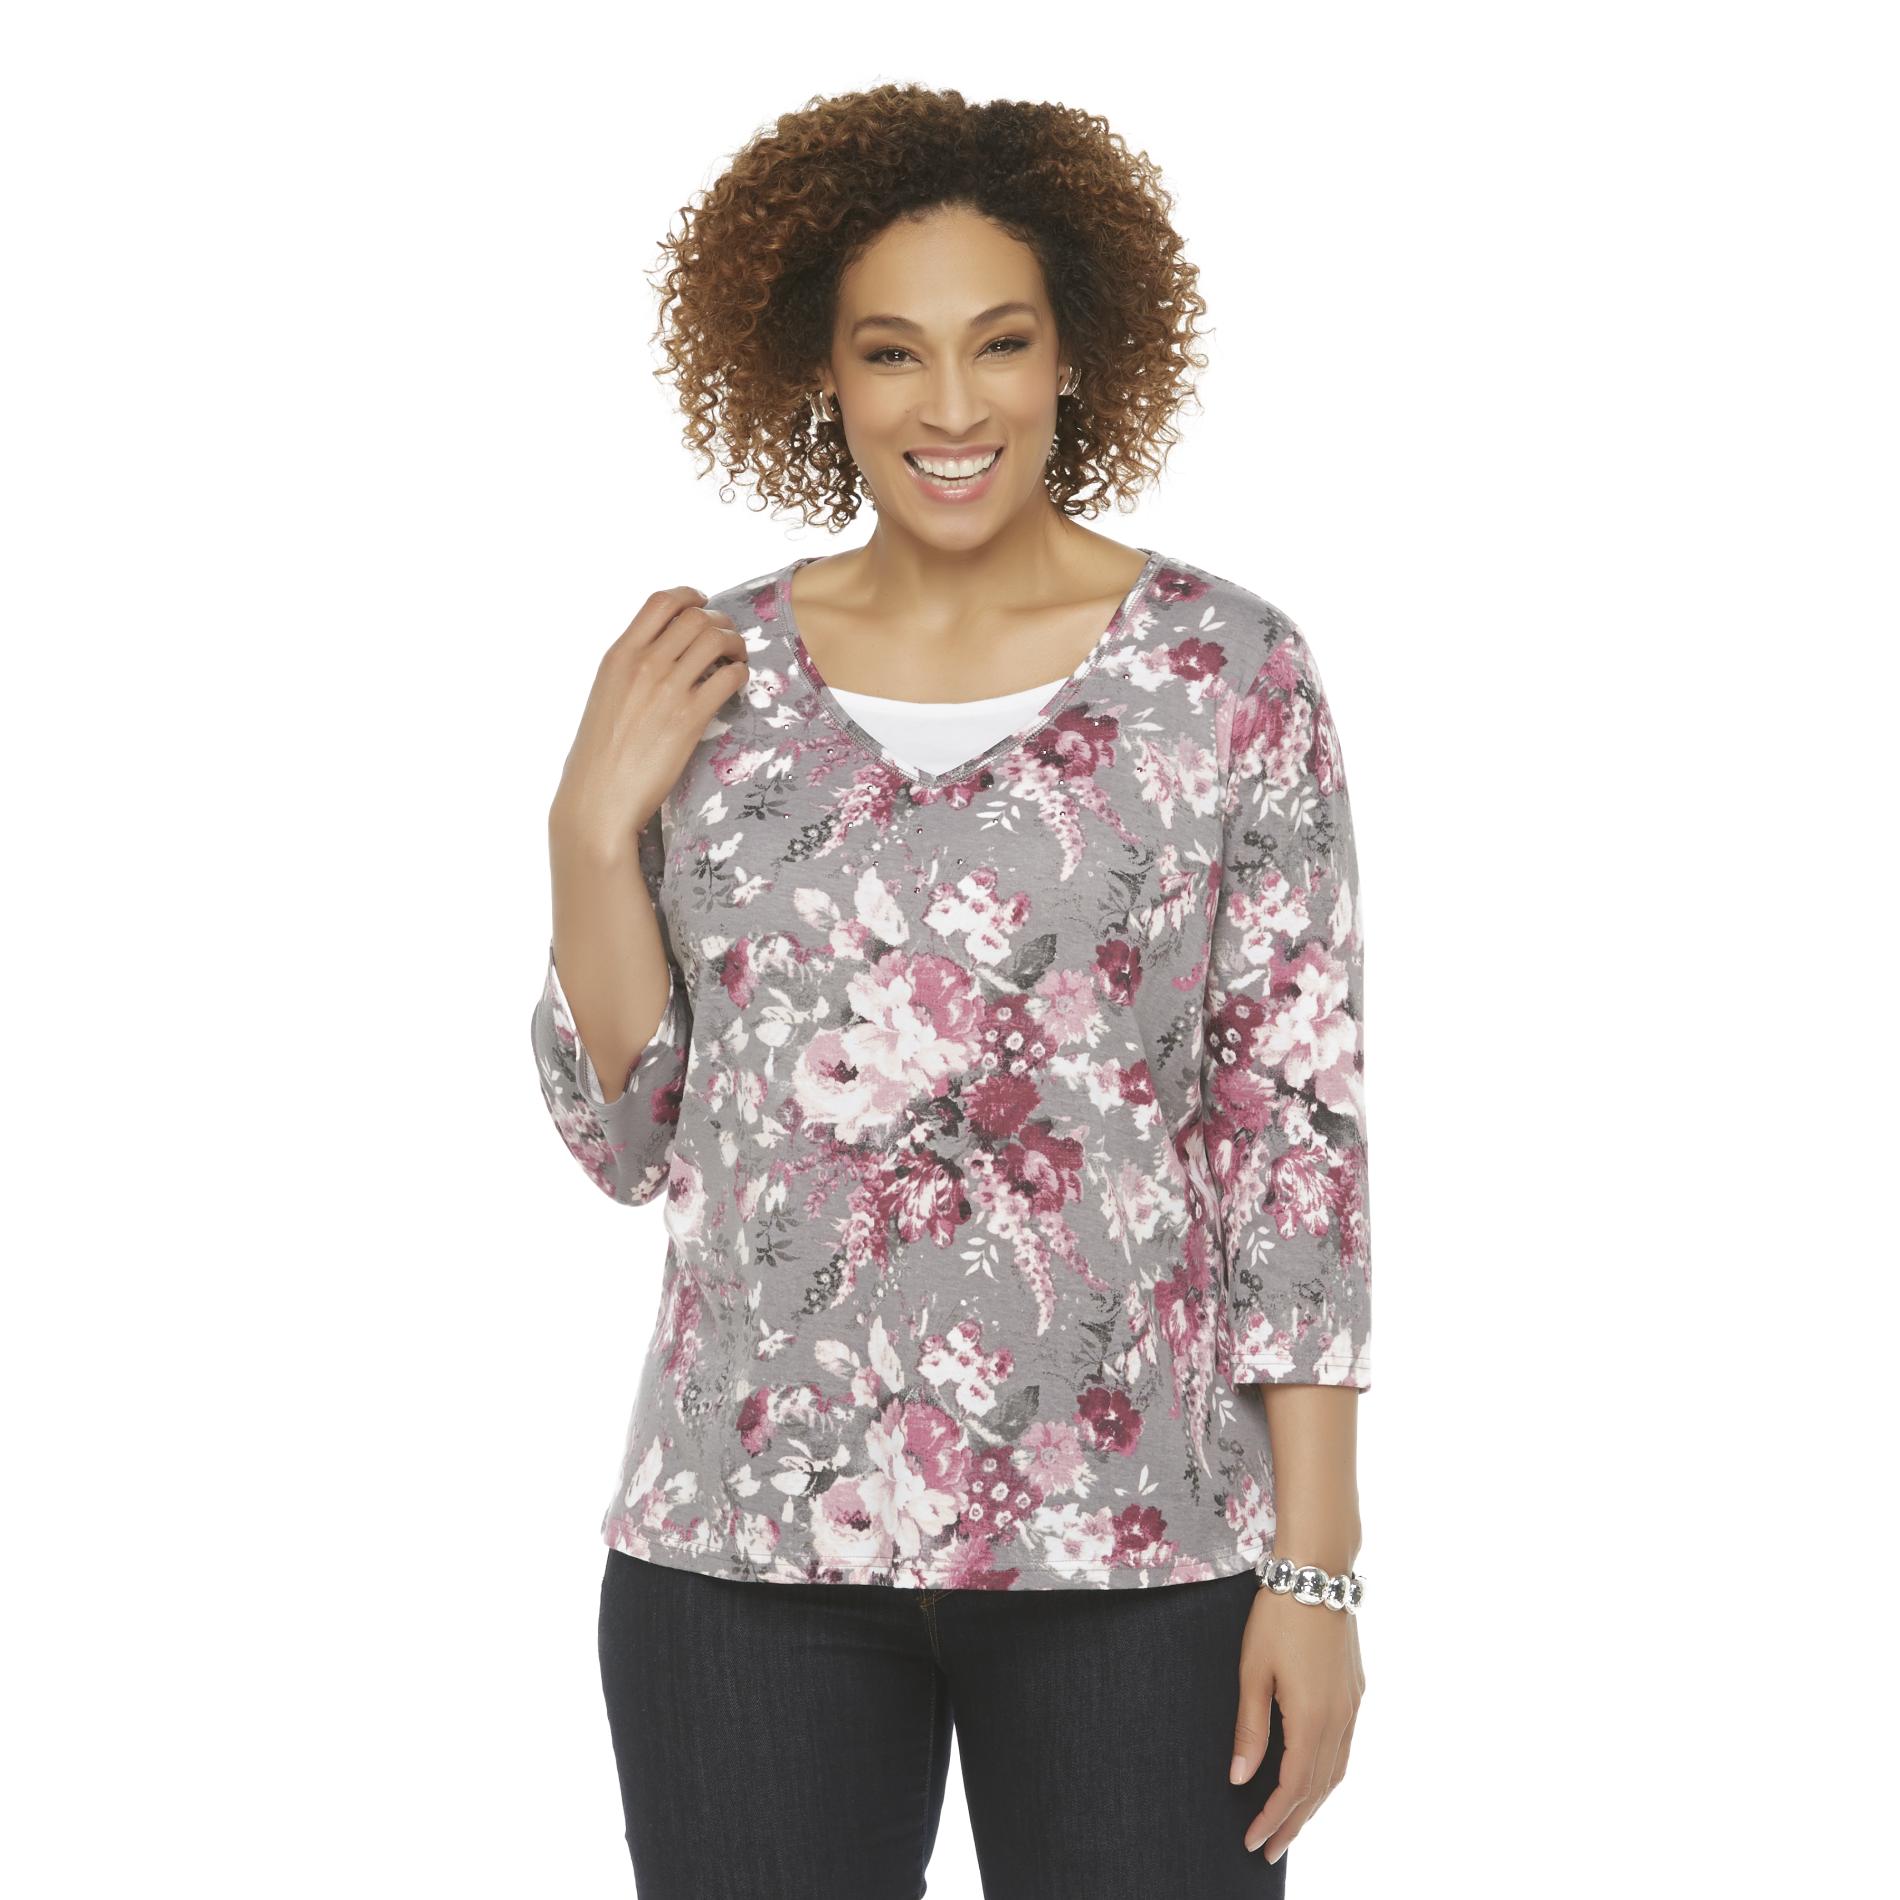 Basic Editions Women's Plus Embellished Layered-Look Top - Floral